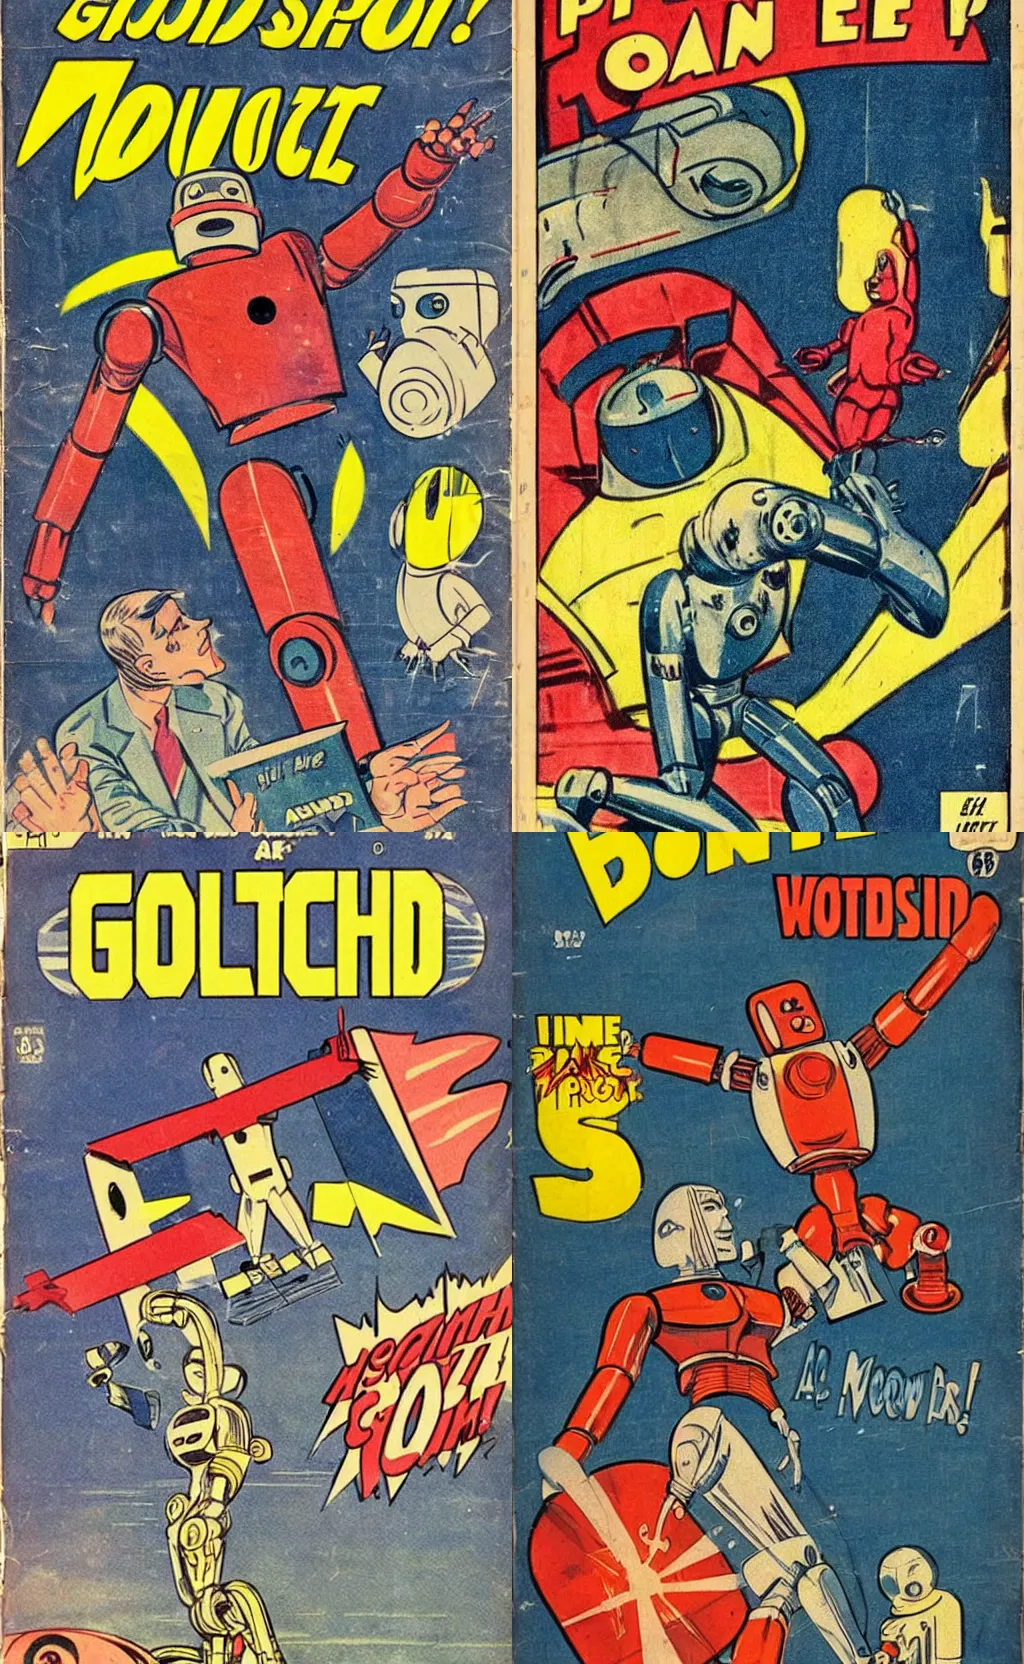 Prompt: a comic book cover from the 1930s featuring a robot waving goodby to the last spaceship leaving the panet